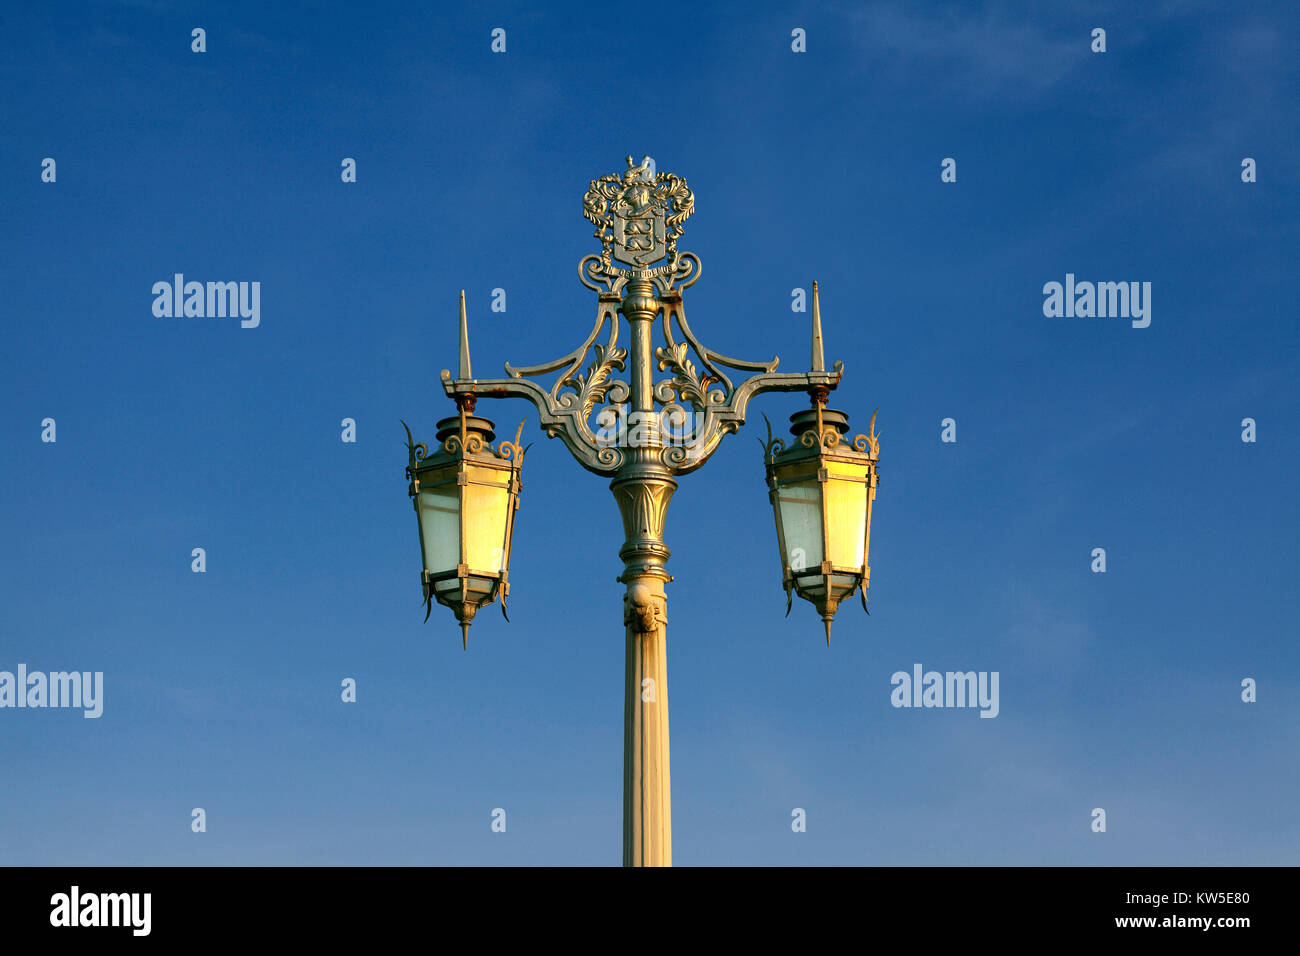 The evening sun catches an historic, ornate, cast iron lamp-standard on Madeira Drive, Brighton. One of 41 installed in 1893 along the seafront. Stock Photo